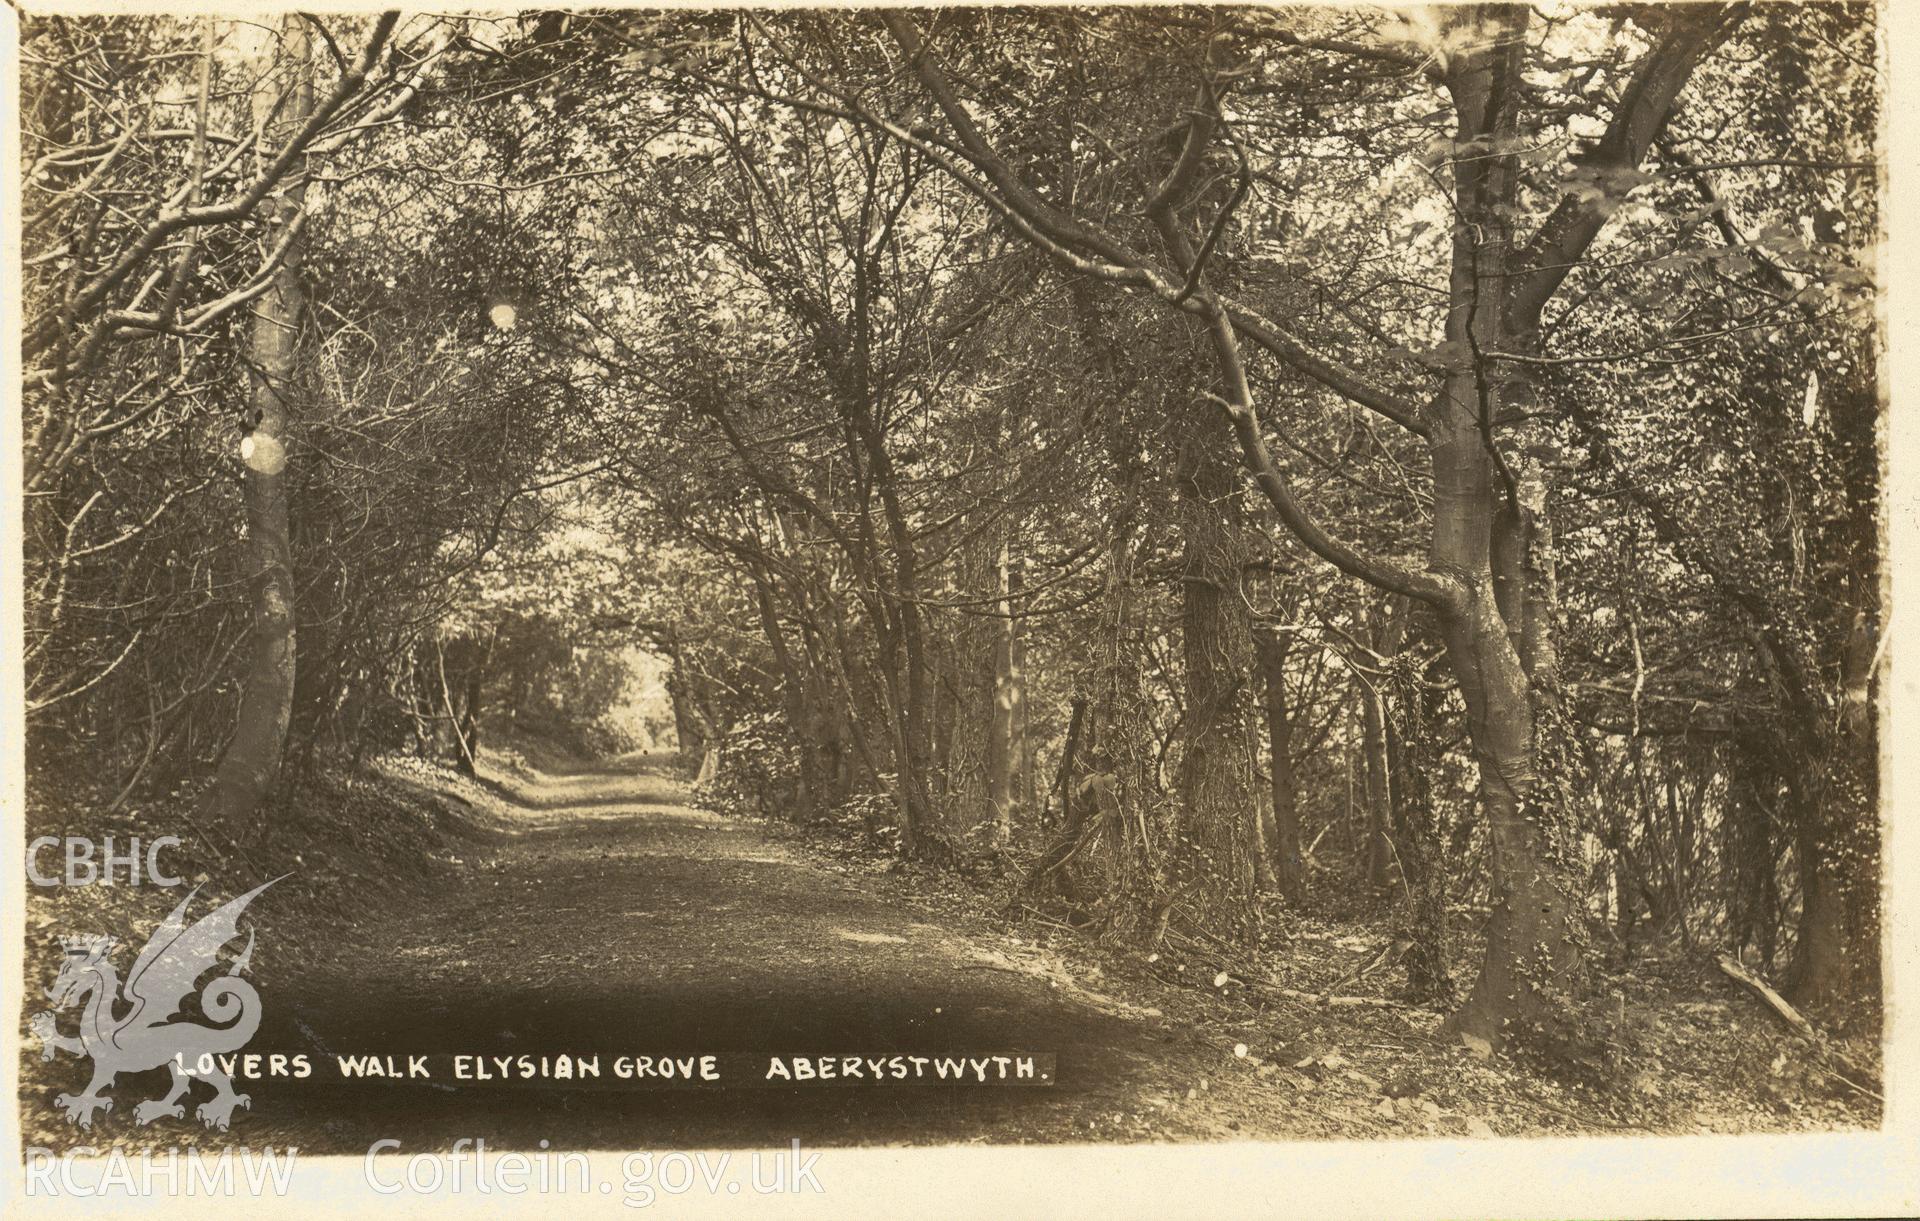 Digitised postcard image of Lovers Walk, Elysian Grove, Aberystwyth. Produced by Parks and Gardens Data Services, from an original item in the Peter Davis Collection at Parks and Gardens UK. We hold only web-resolution images of this collection, suitable for viewing on screen and for research purposes only. We do not hold the original images, or publication quality scans.